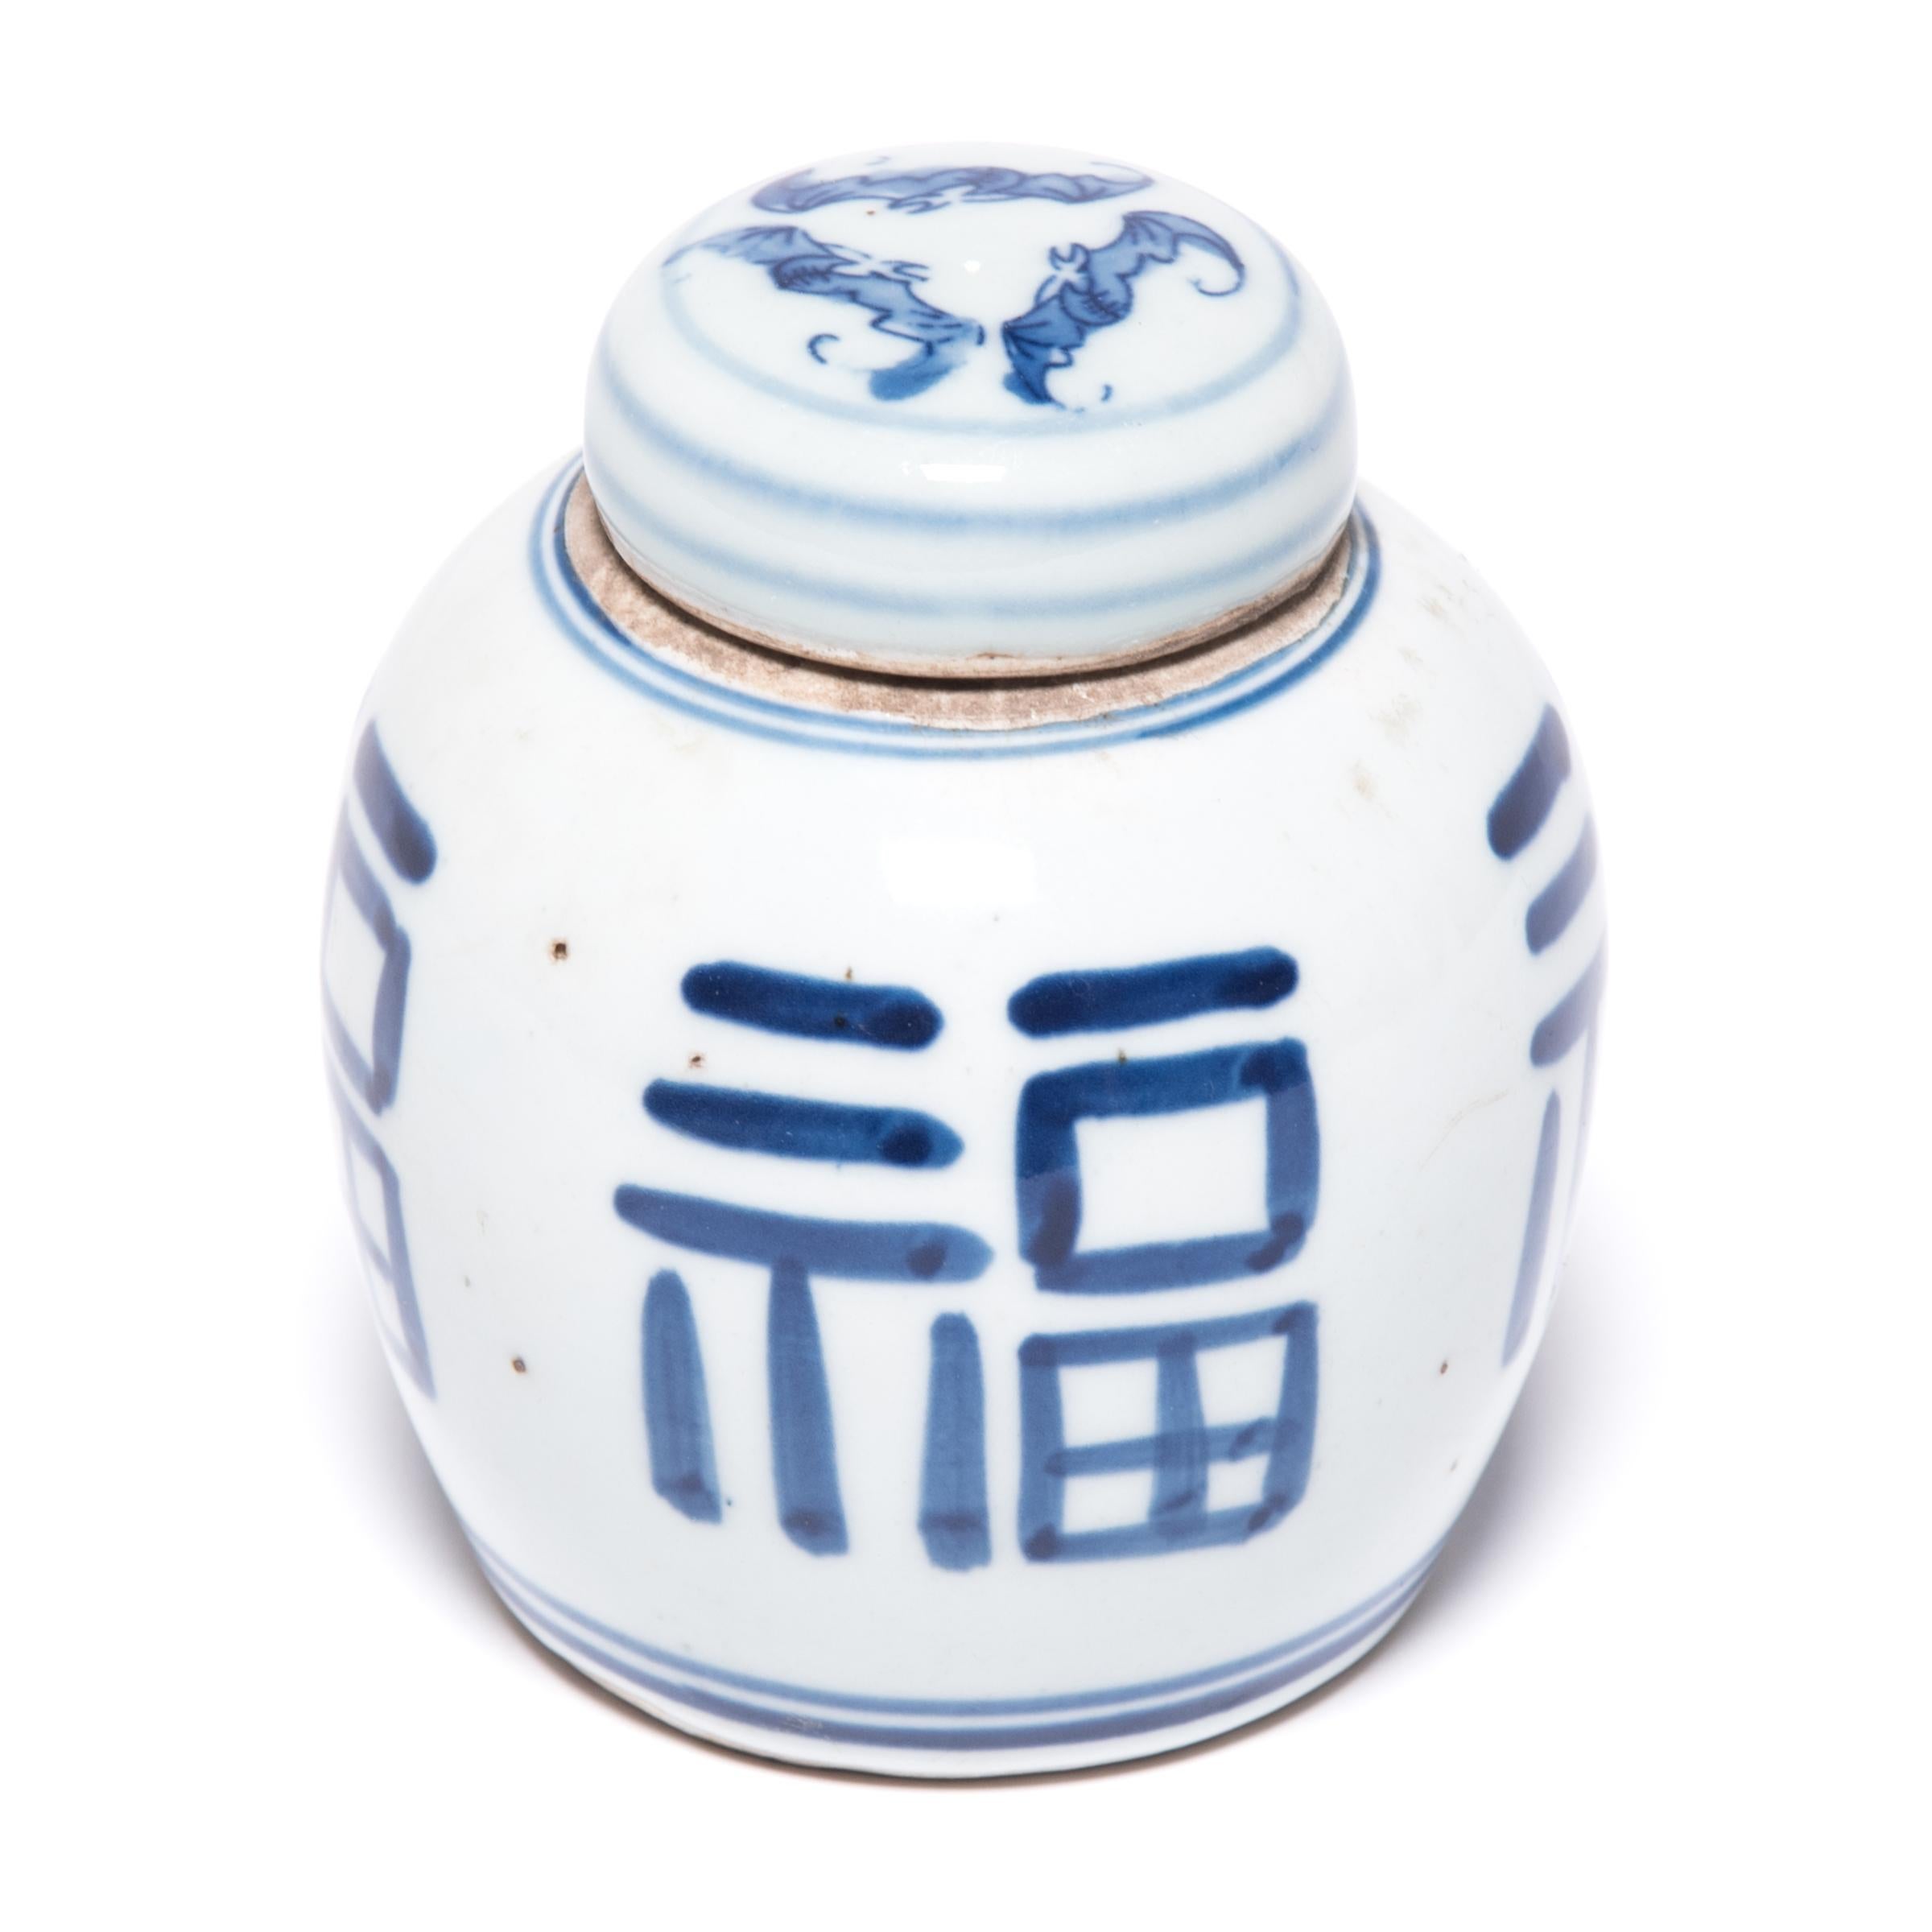 Qing Petite Chinese Blue and White Prosperity Jar